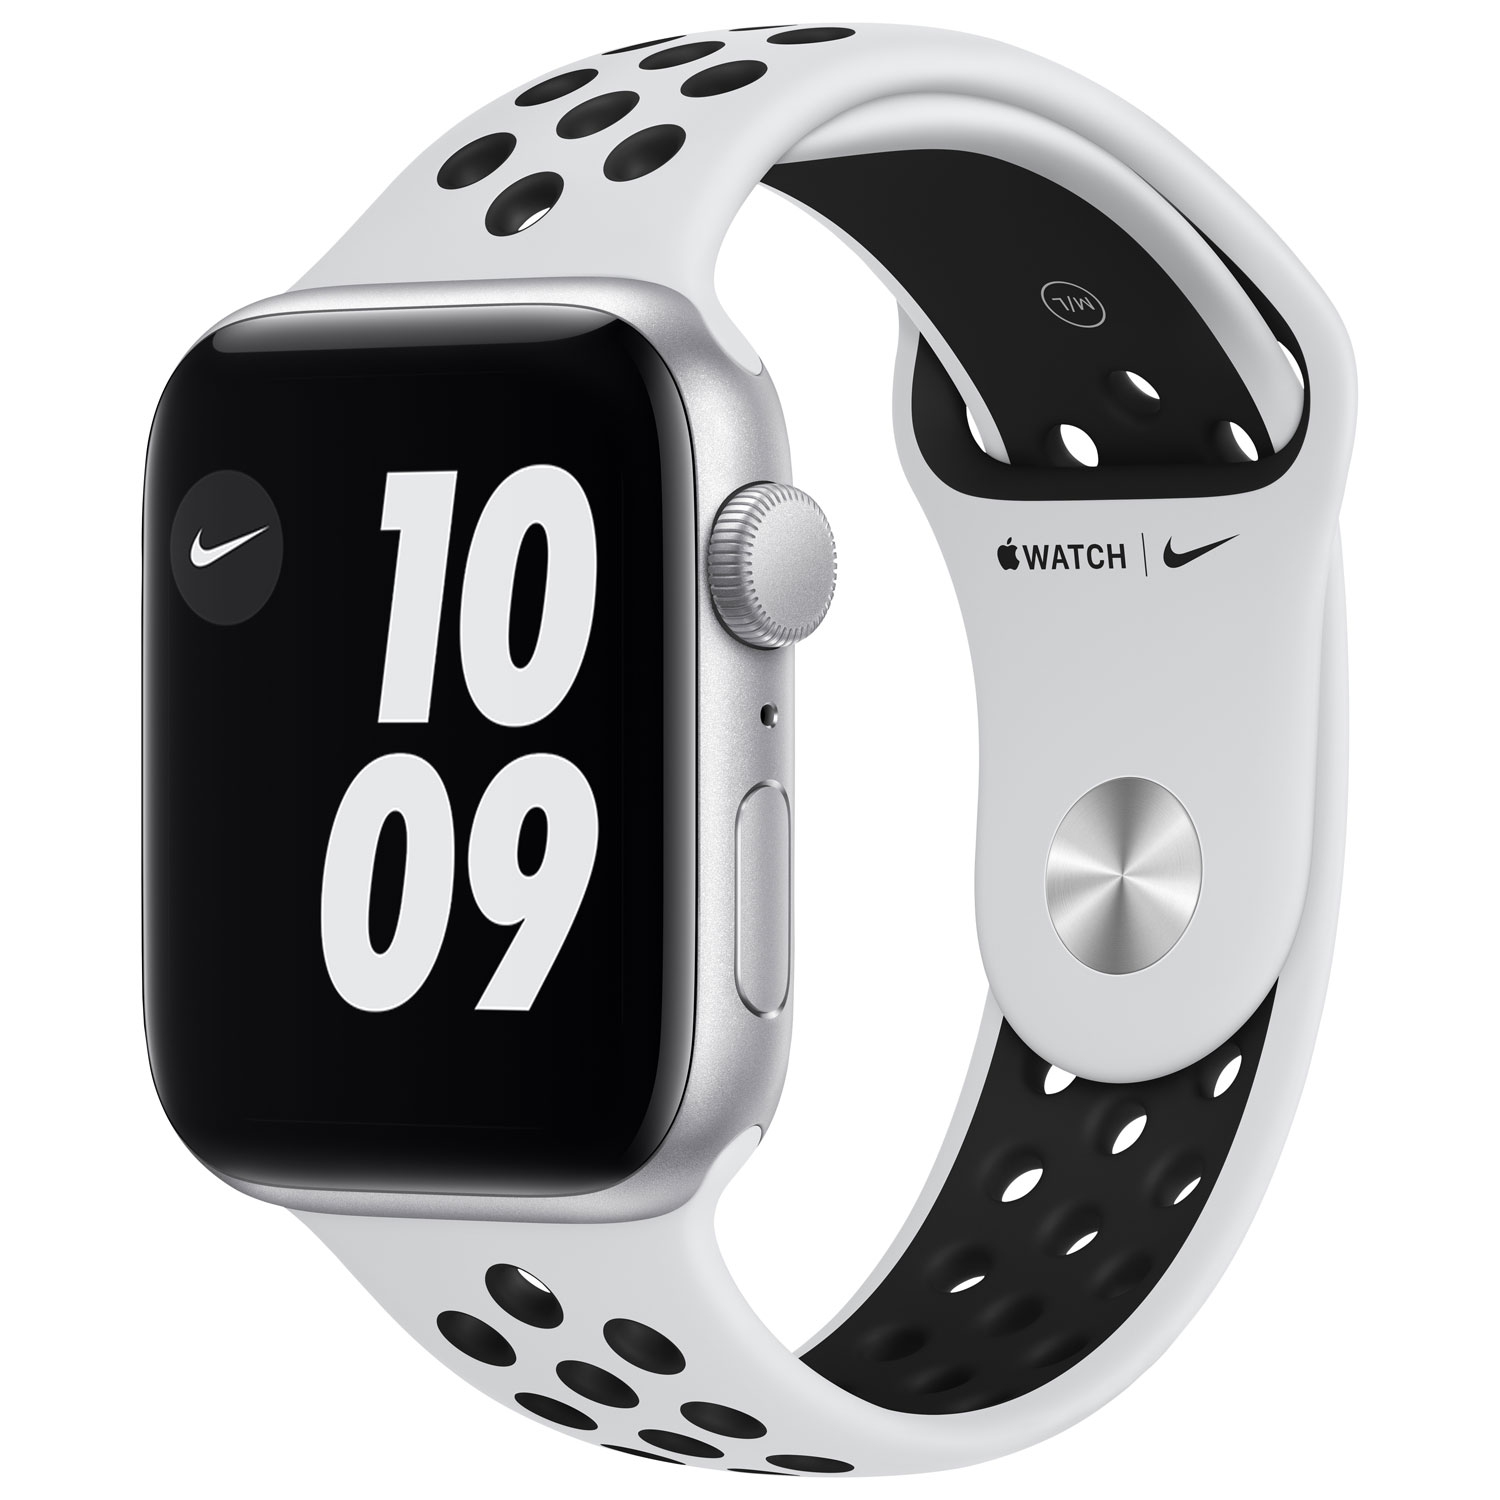 Refurbished (Fair) - Apple Watch Nike SE (GPS) 44mm Silver Aluminum Case with Pure Platinum/Black Nike Sport Band